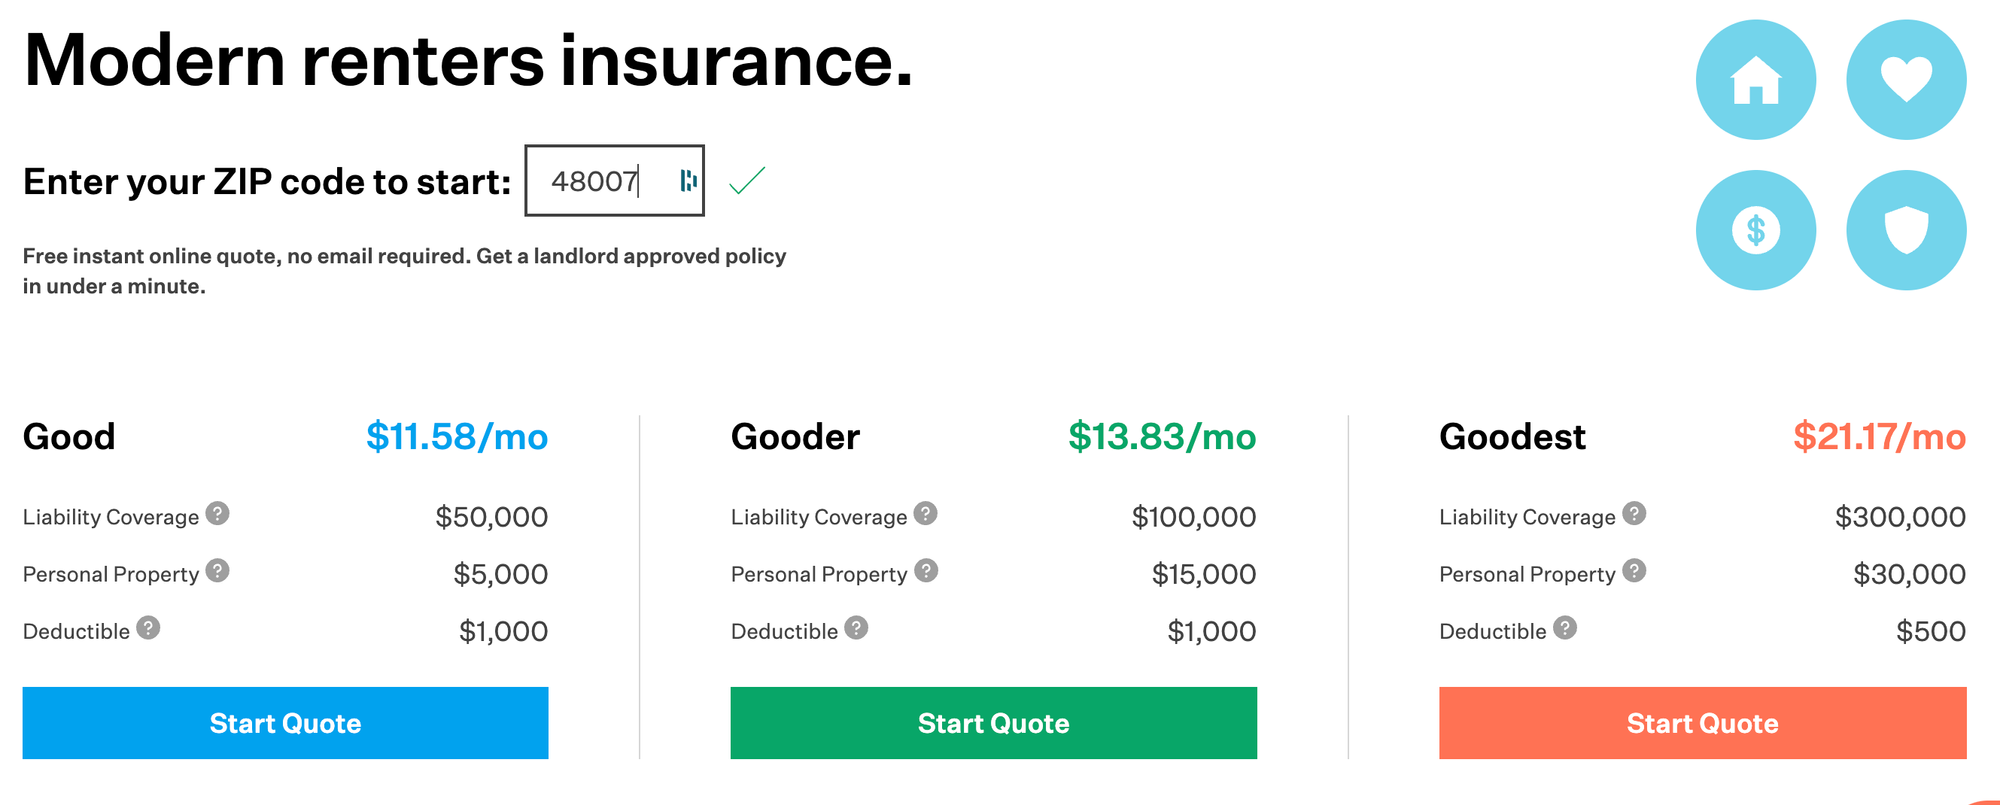 Renters insurance prices for ZIP code 48007 (Troy, Michigan)